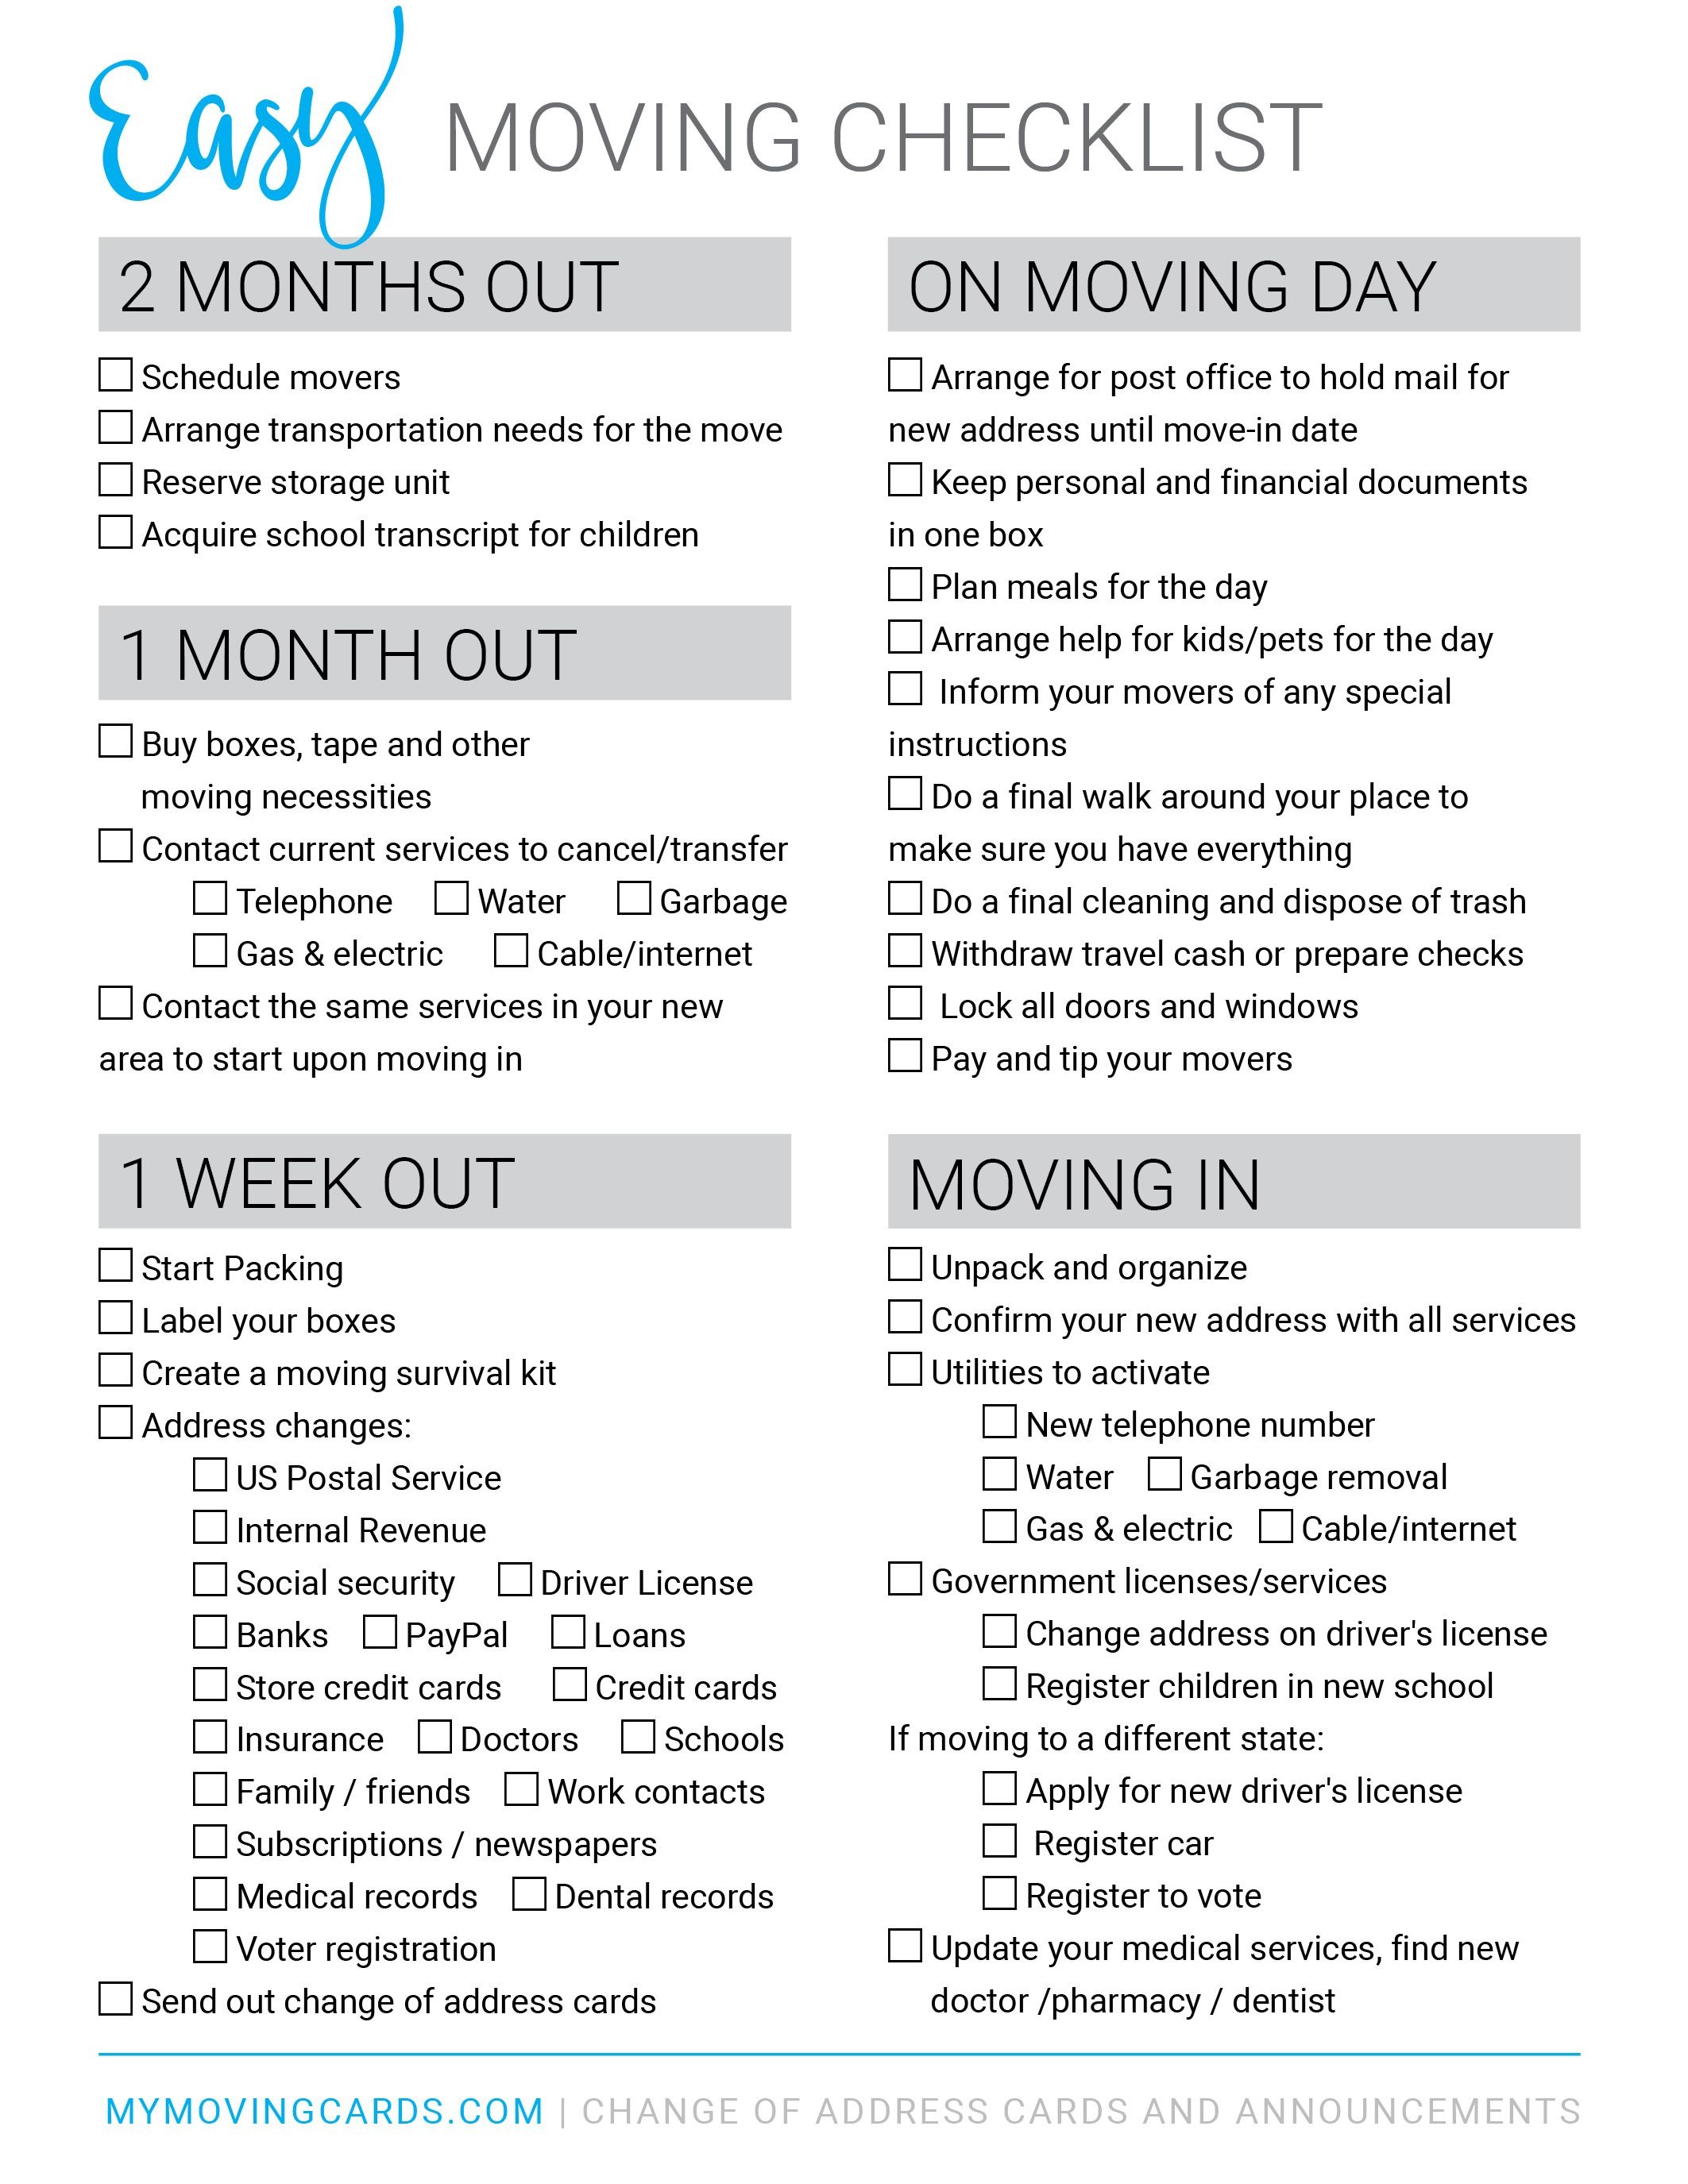 Moving Checklist - Free Printable Download | Moving Cards In 2019 - Free Printable Change Of Address Cards